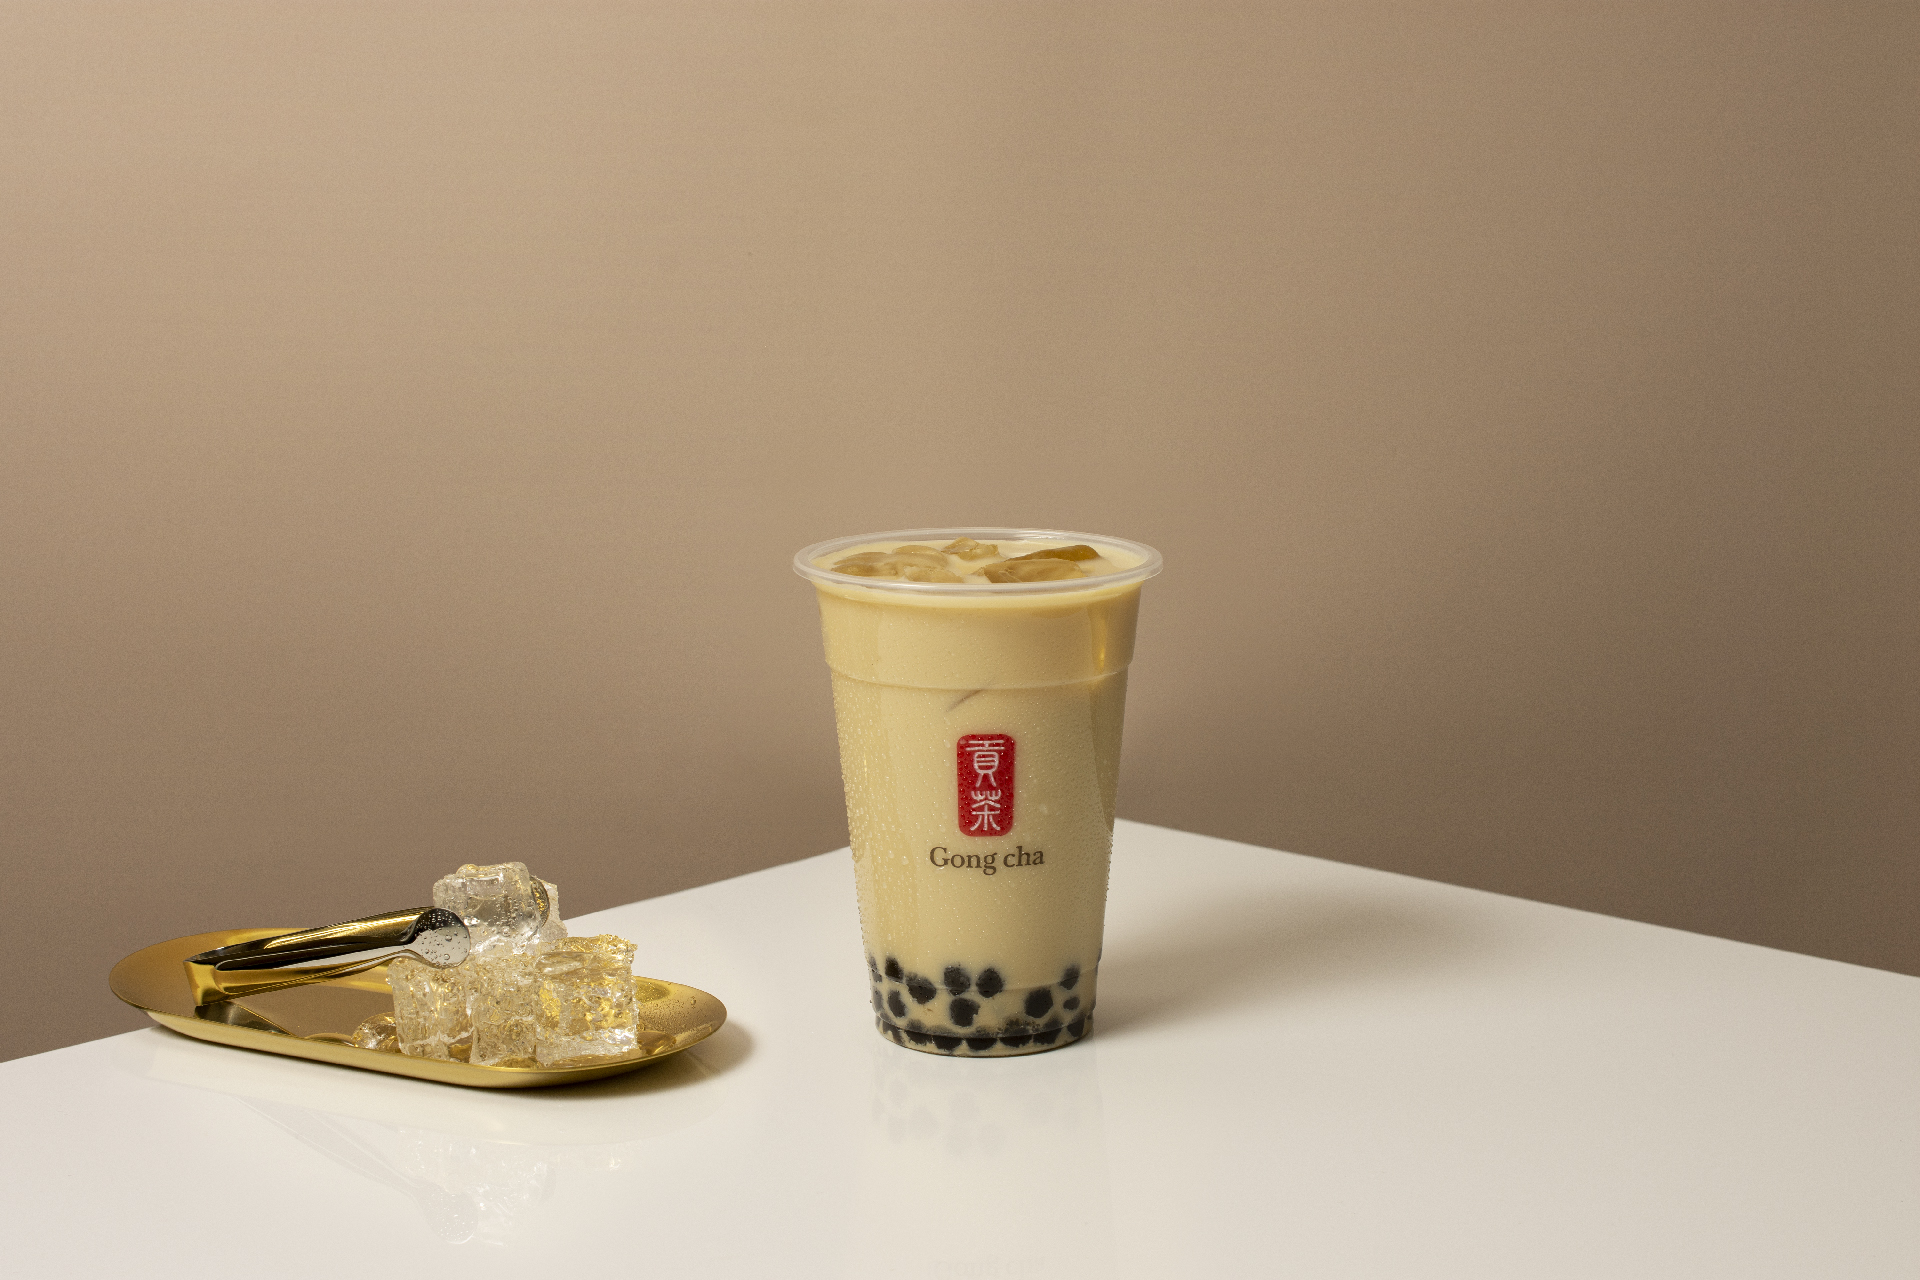 Gong Cha Drink on a desk